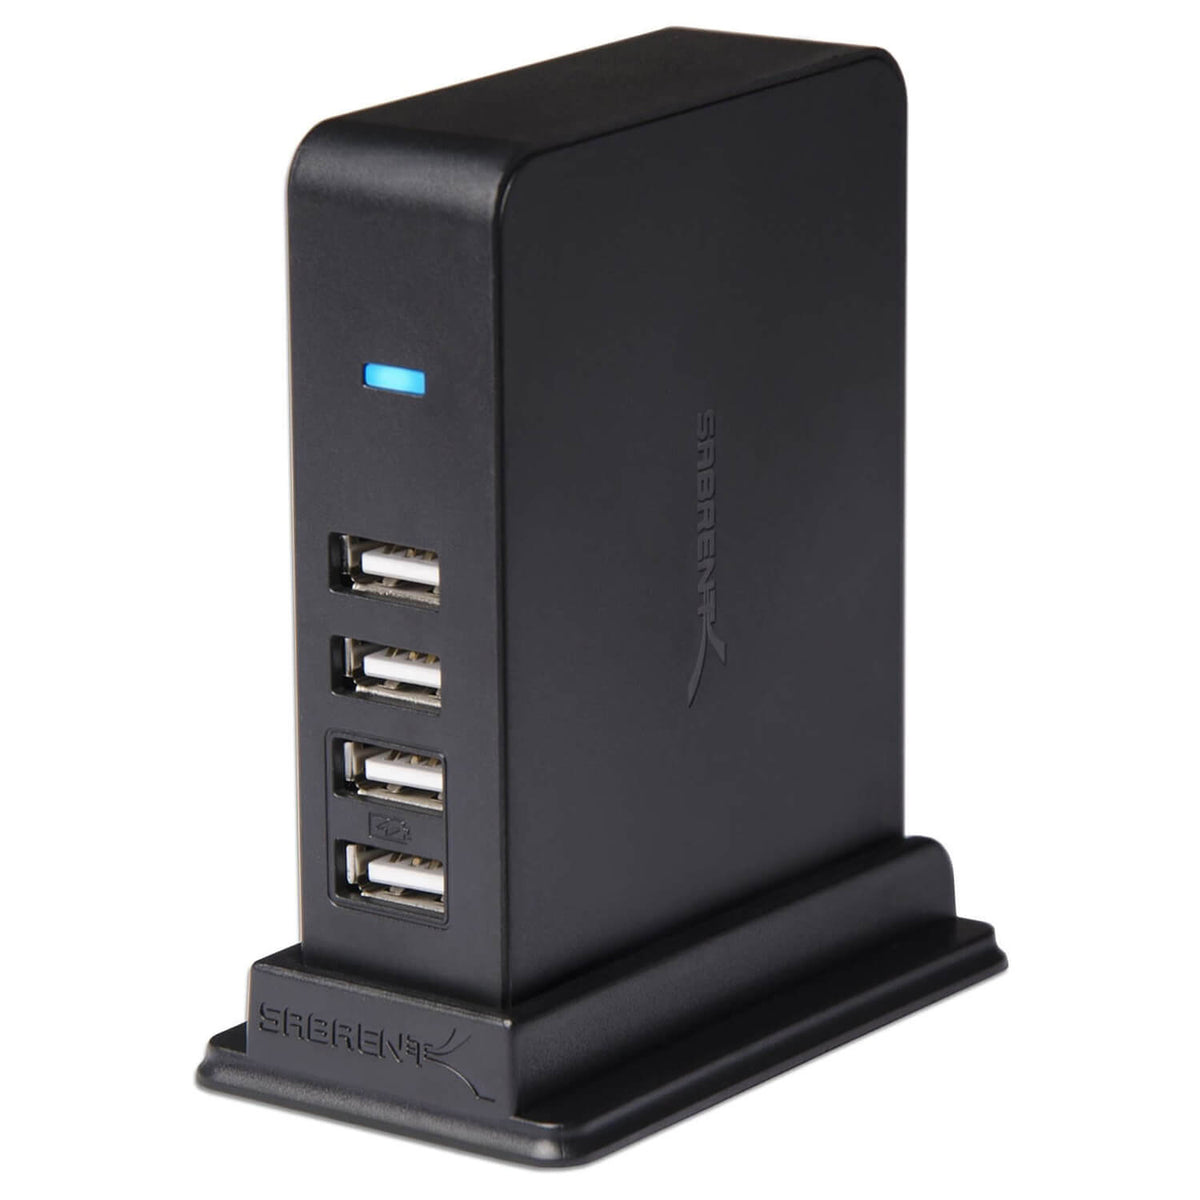 7 Port USB 2.0 Hub + 2 Charging Ports with 5V/4A Power Adapter